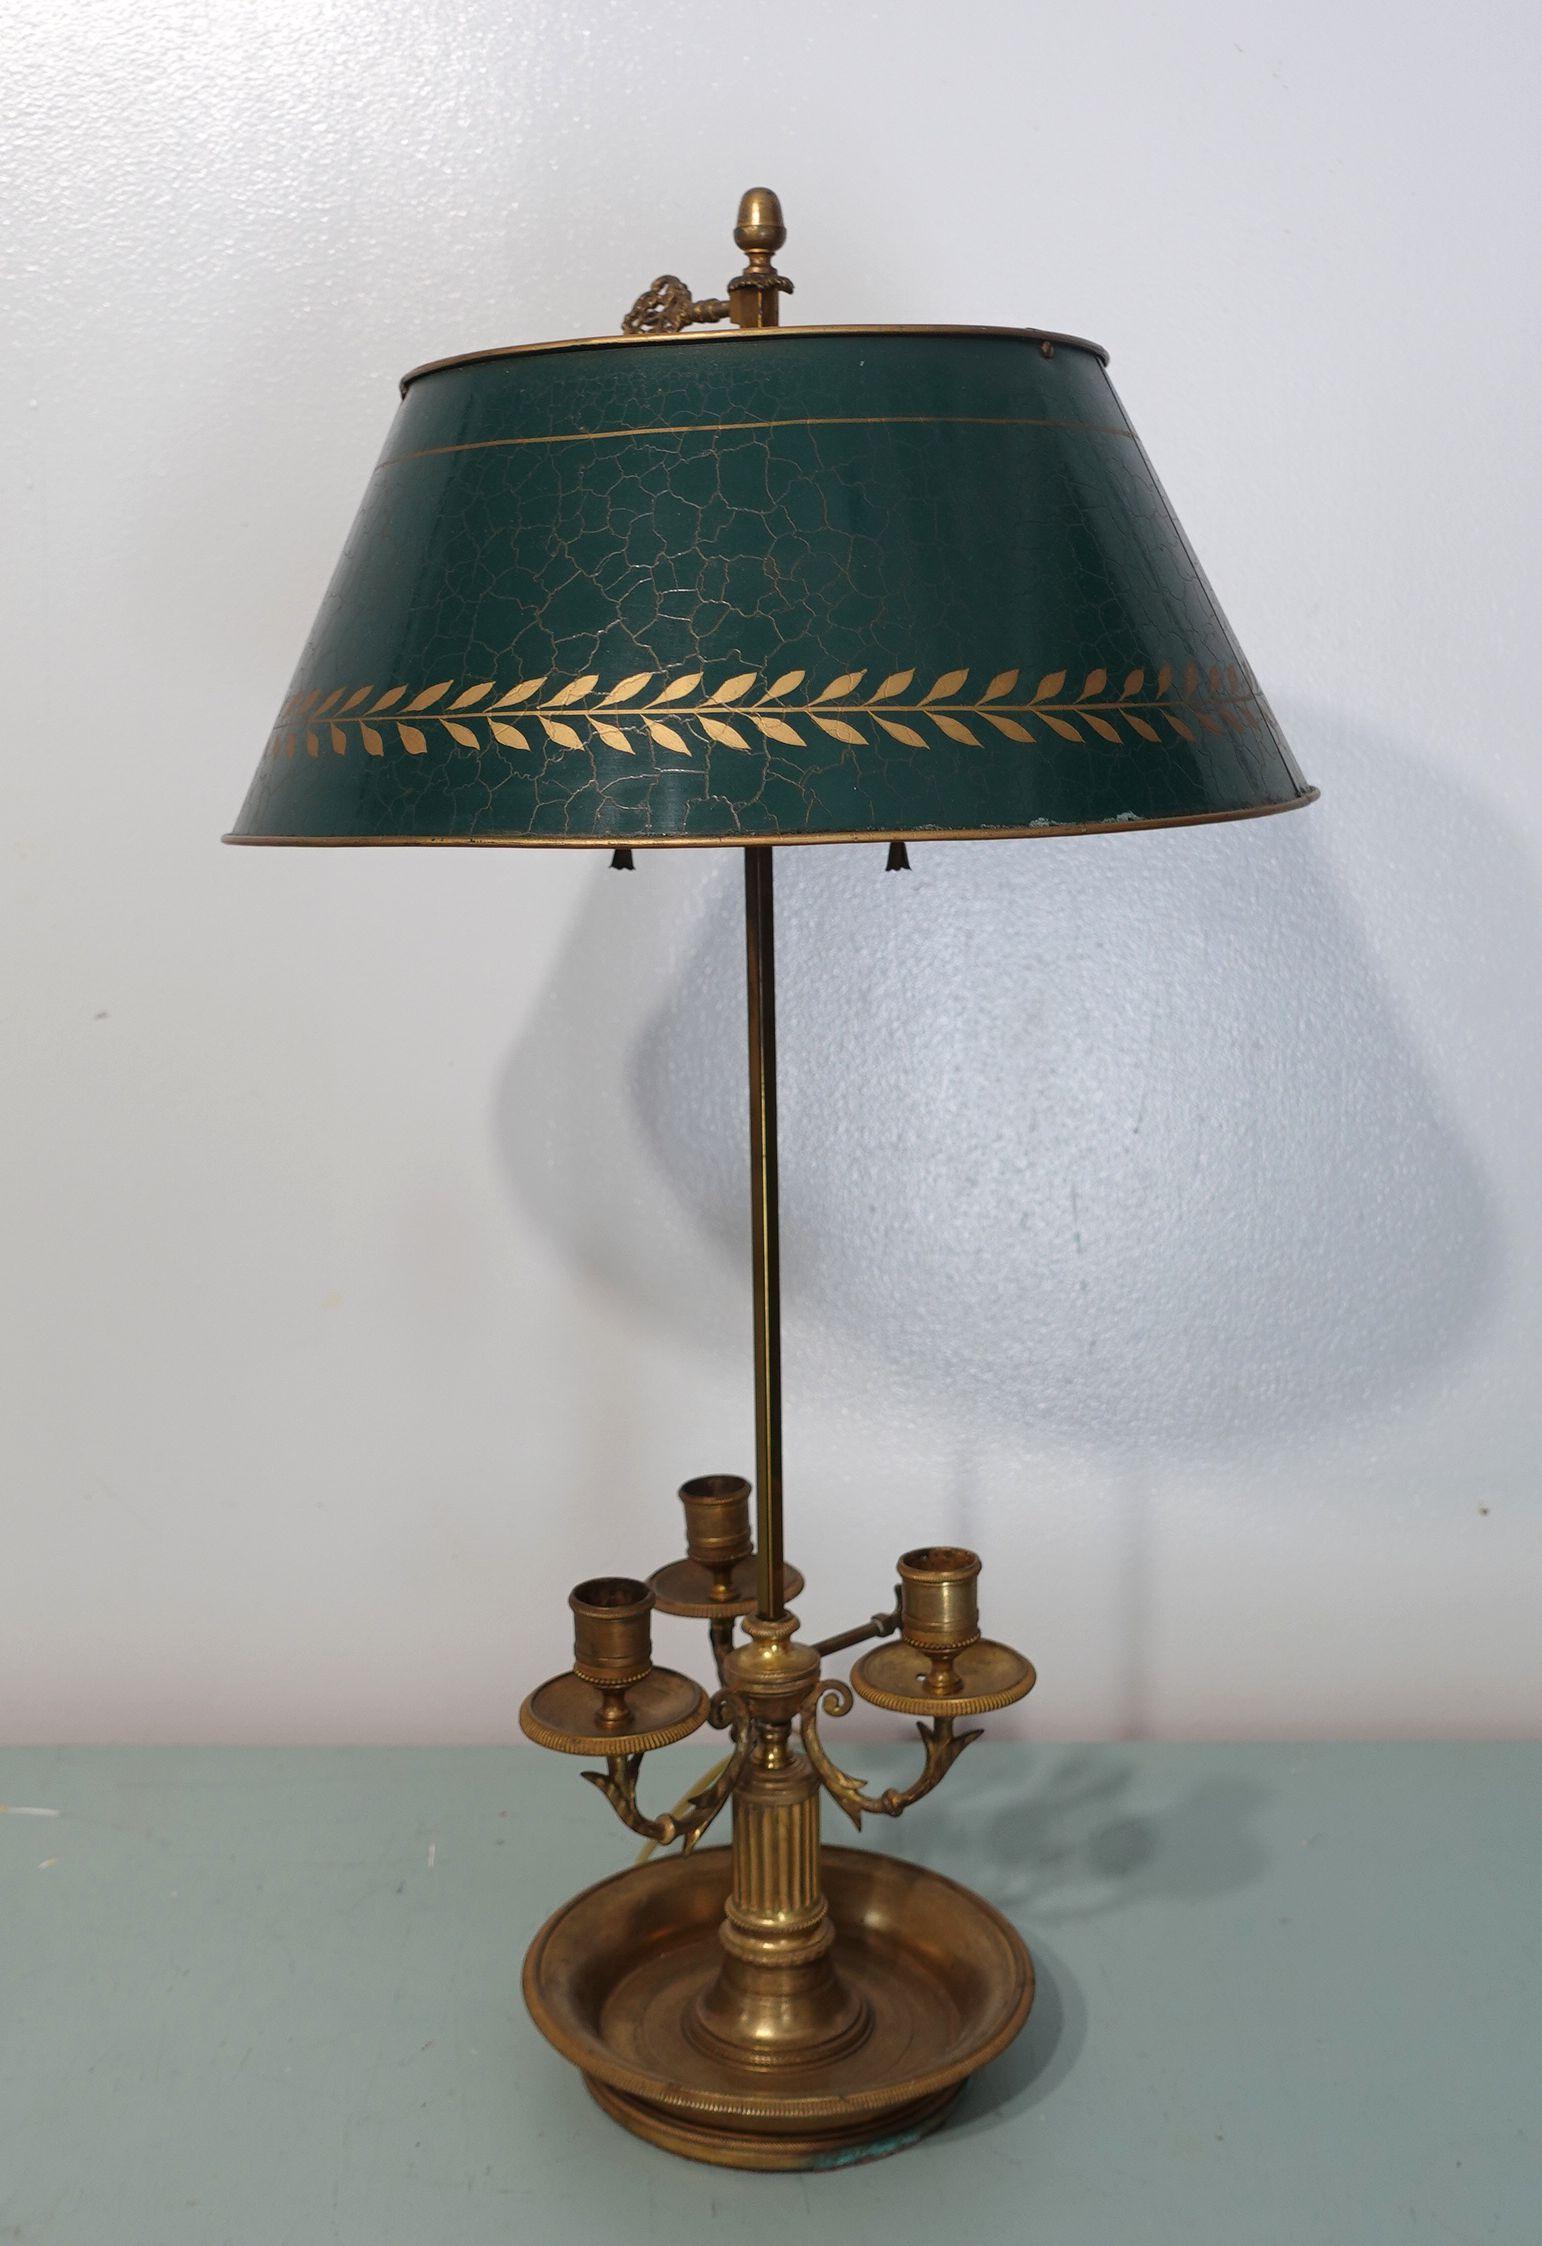 A 19th-century bouillotte lamp in the Louis XVI taste, the steel shaft with brass laurel ring and arrowhead screw, supporting a green tole shade, all above a base of three brass candle arms with stylized supports, set upon a fluted column and engine